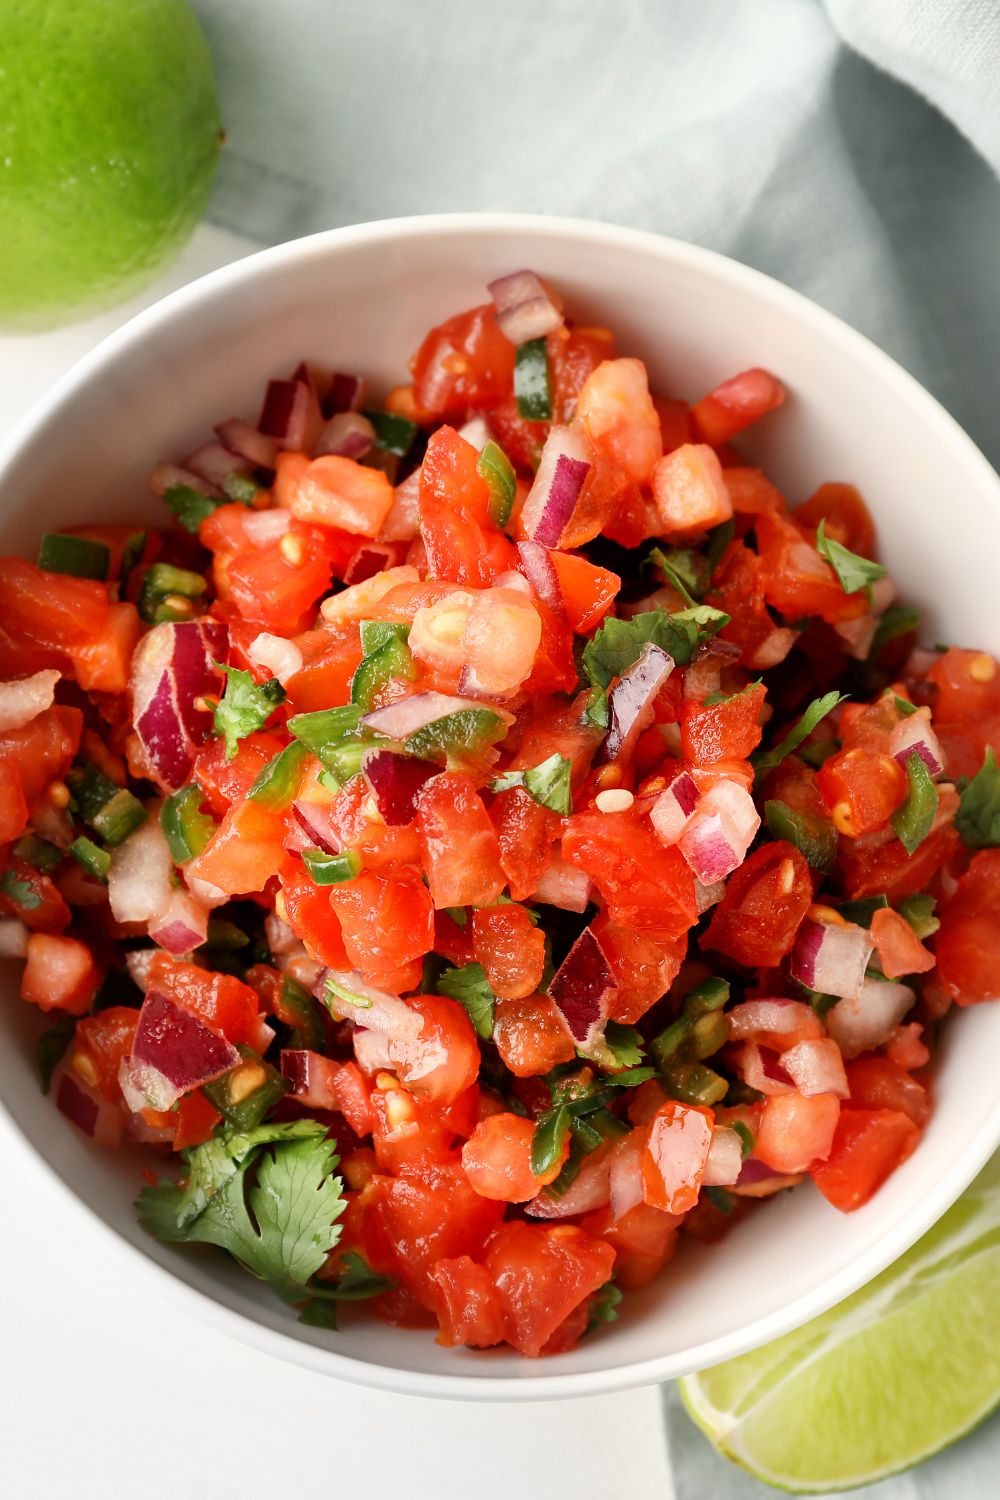 A bowl of tennis team salsa filled with chopped tomatoes red onion, and cilantro